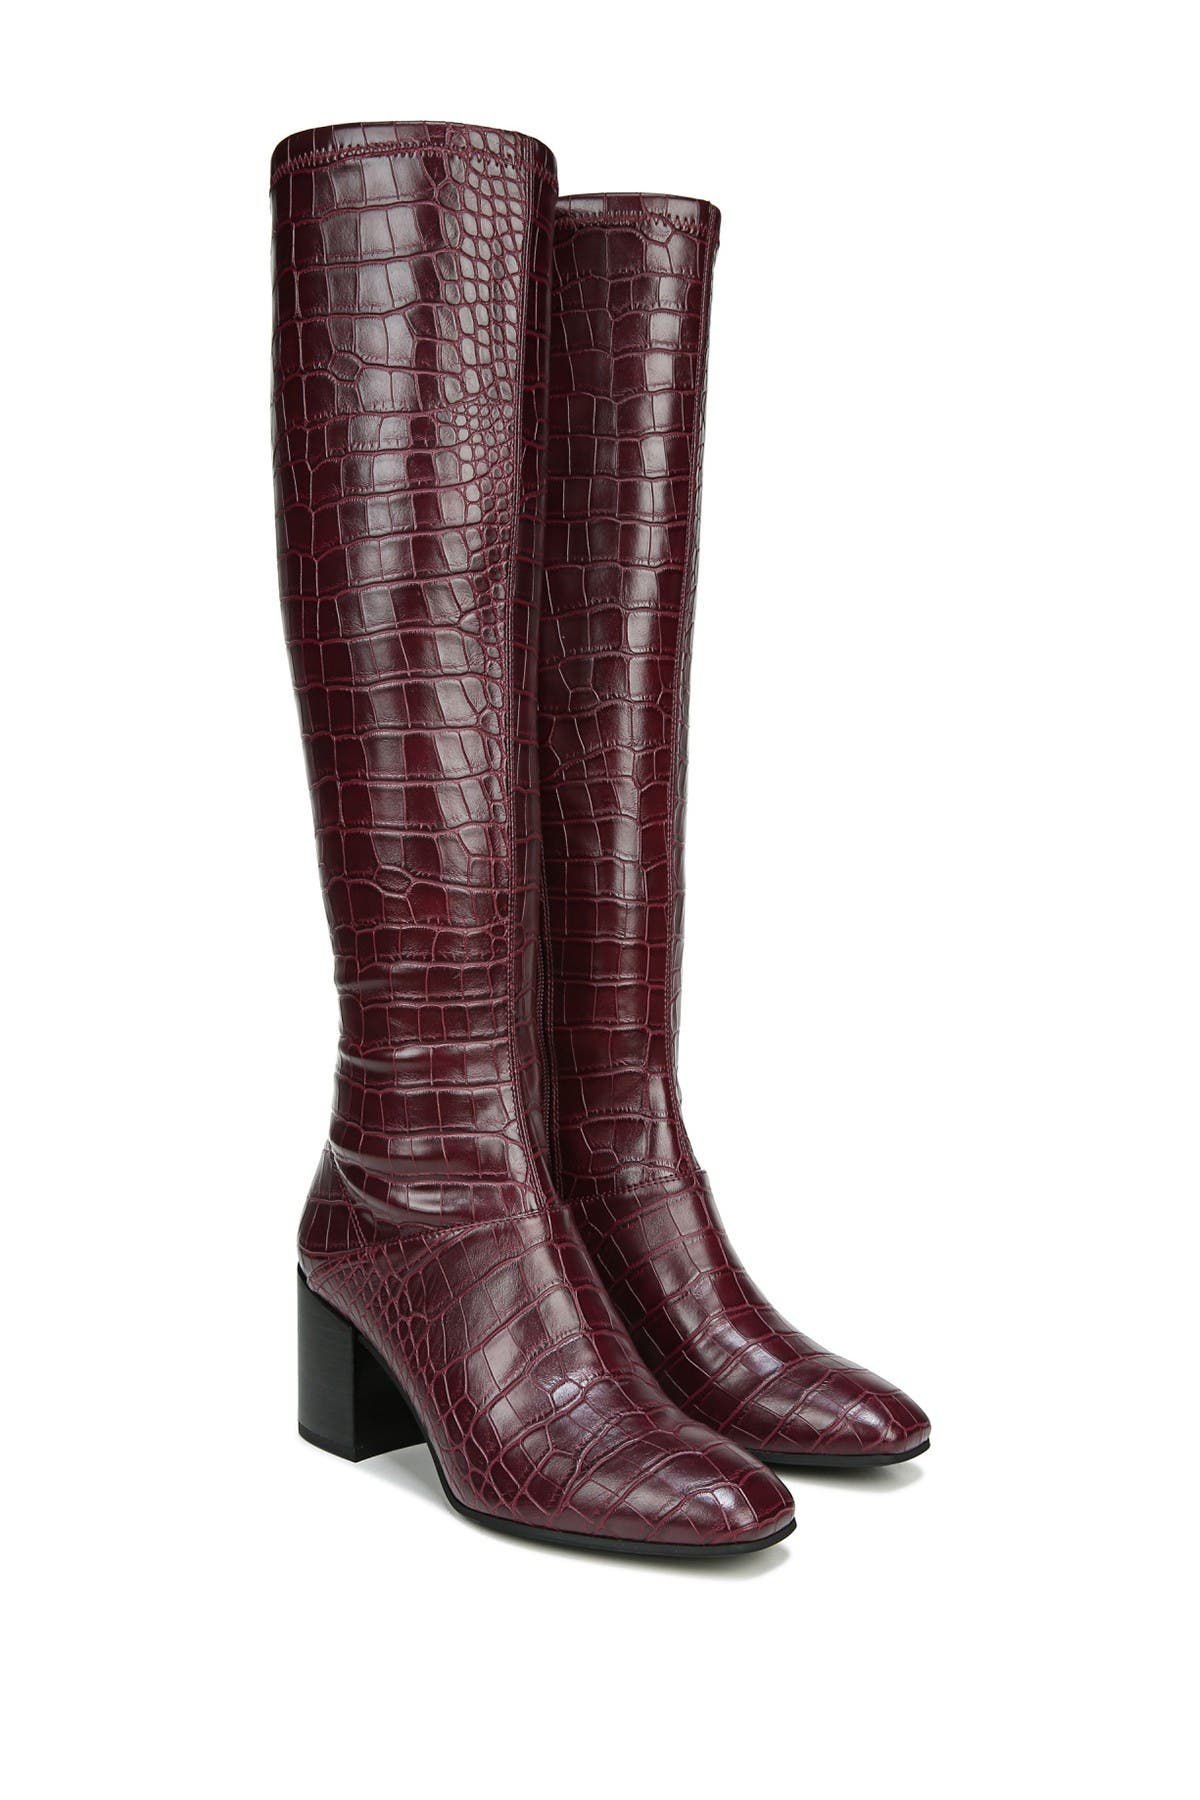 Tribute Croc Embossed Leather Boot 